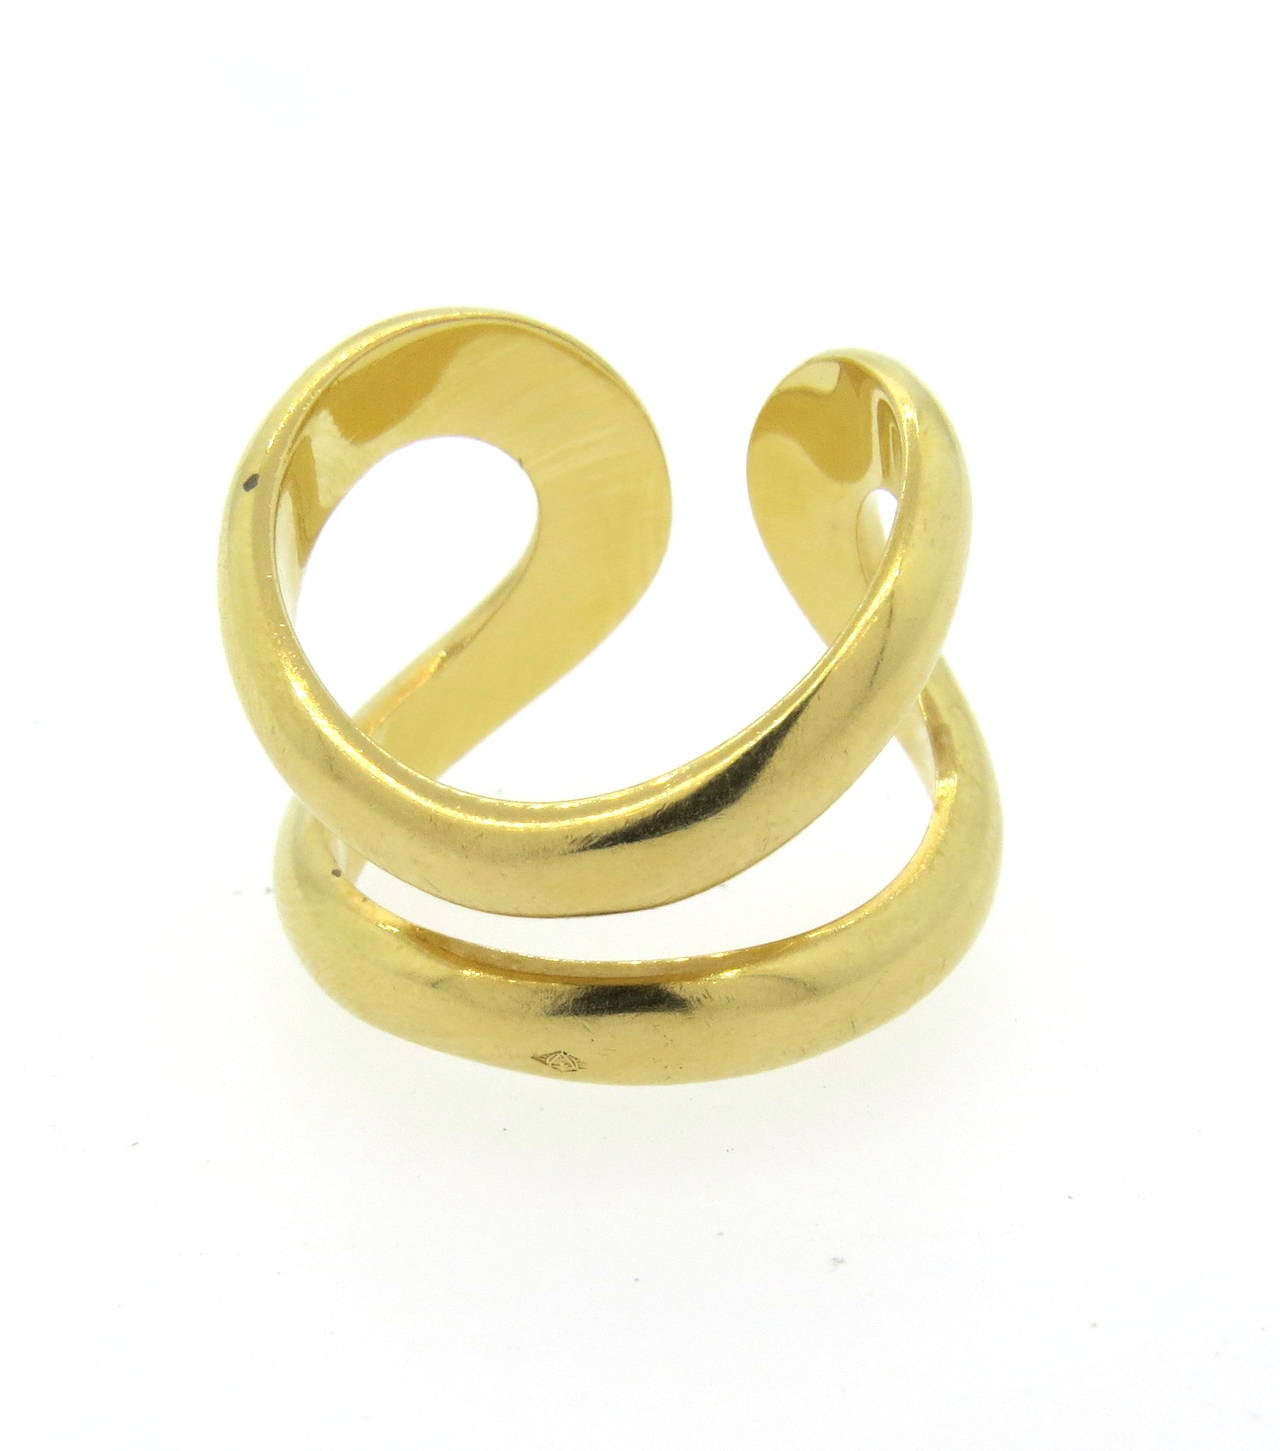 An 18k yellow gold ring.  Crafted by Hermes, the ring is 20mm at the widest point and a size 60 (US size 9.5).  The weight of the ring is 18.1 grams.